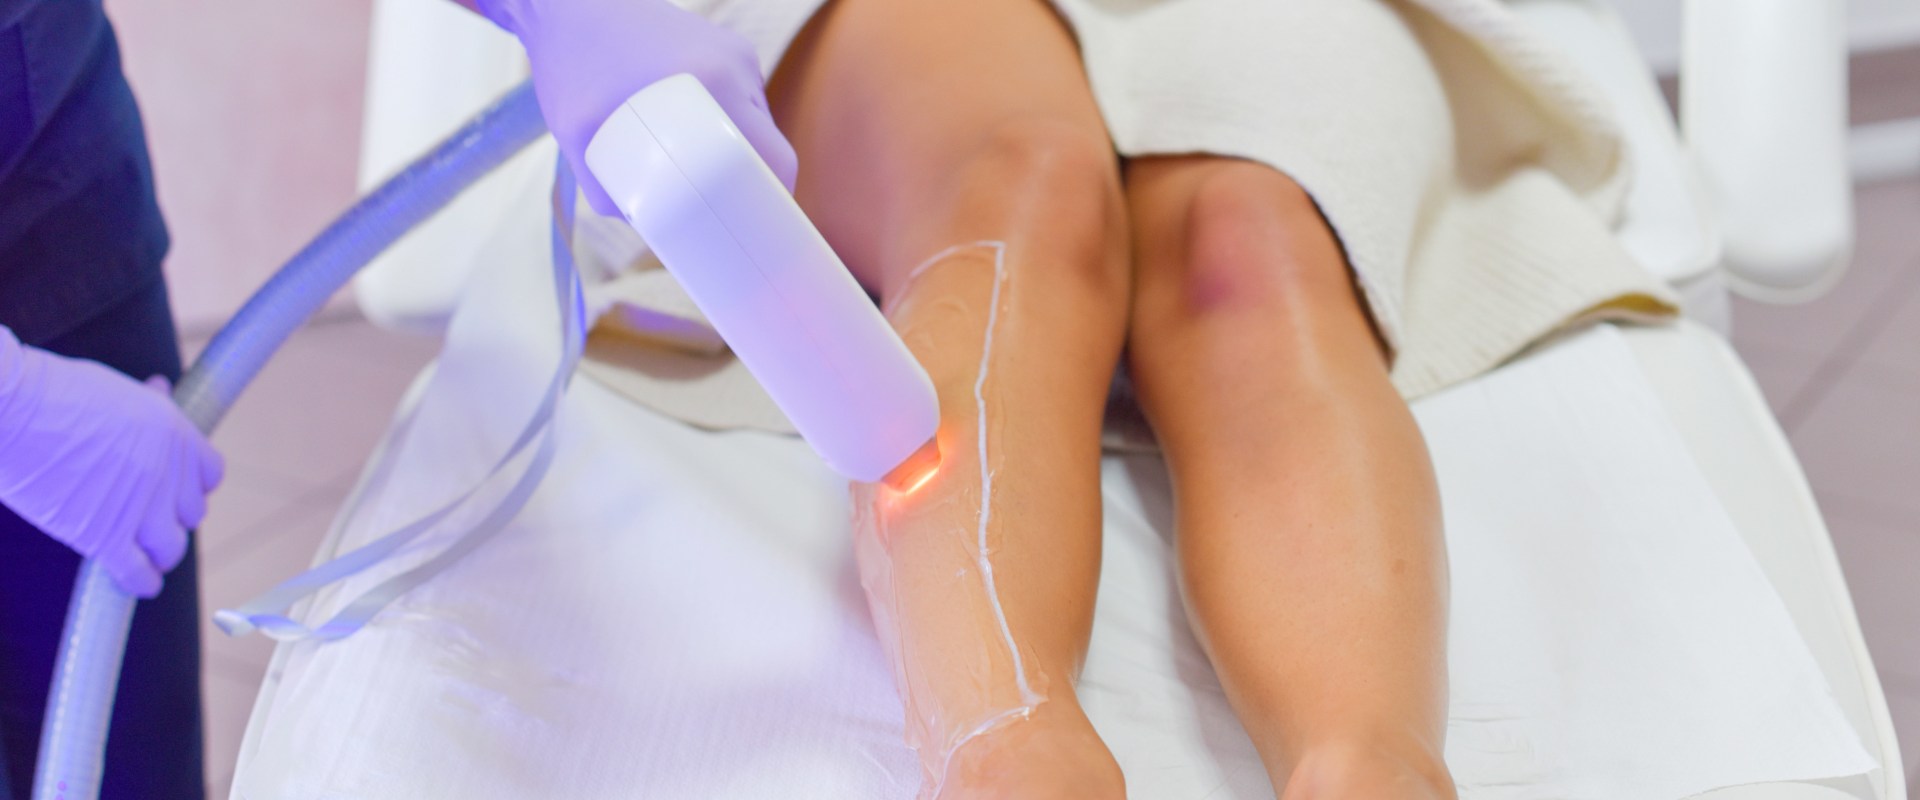 Can Laser Hair Removal be Used on Sensitive Areas of the Body?